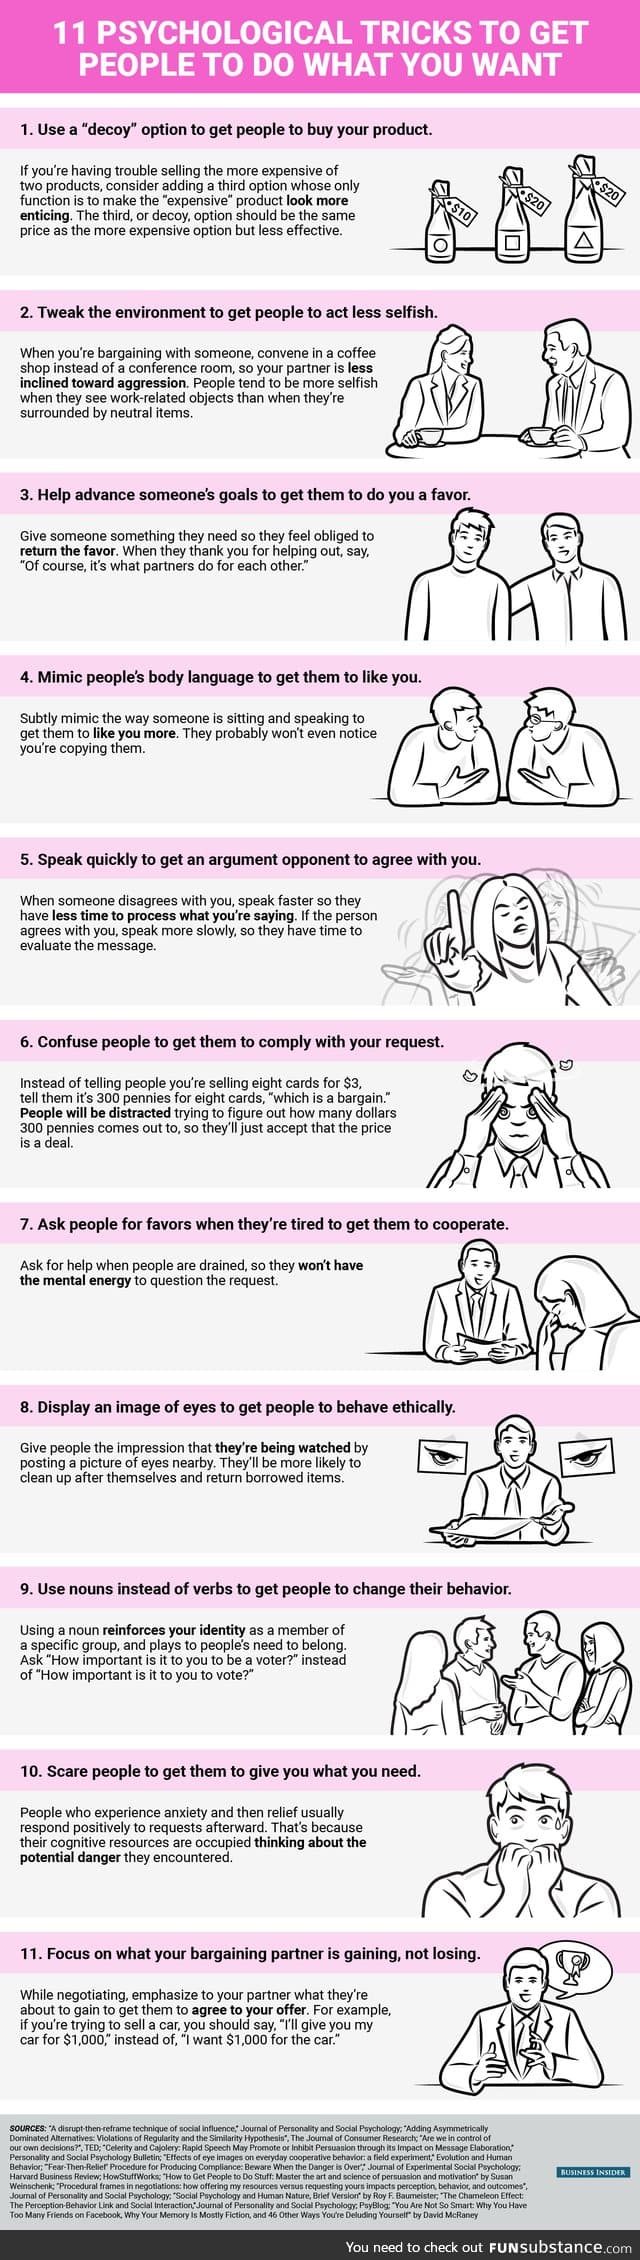 Psychological tricks to get people to do what you want